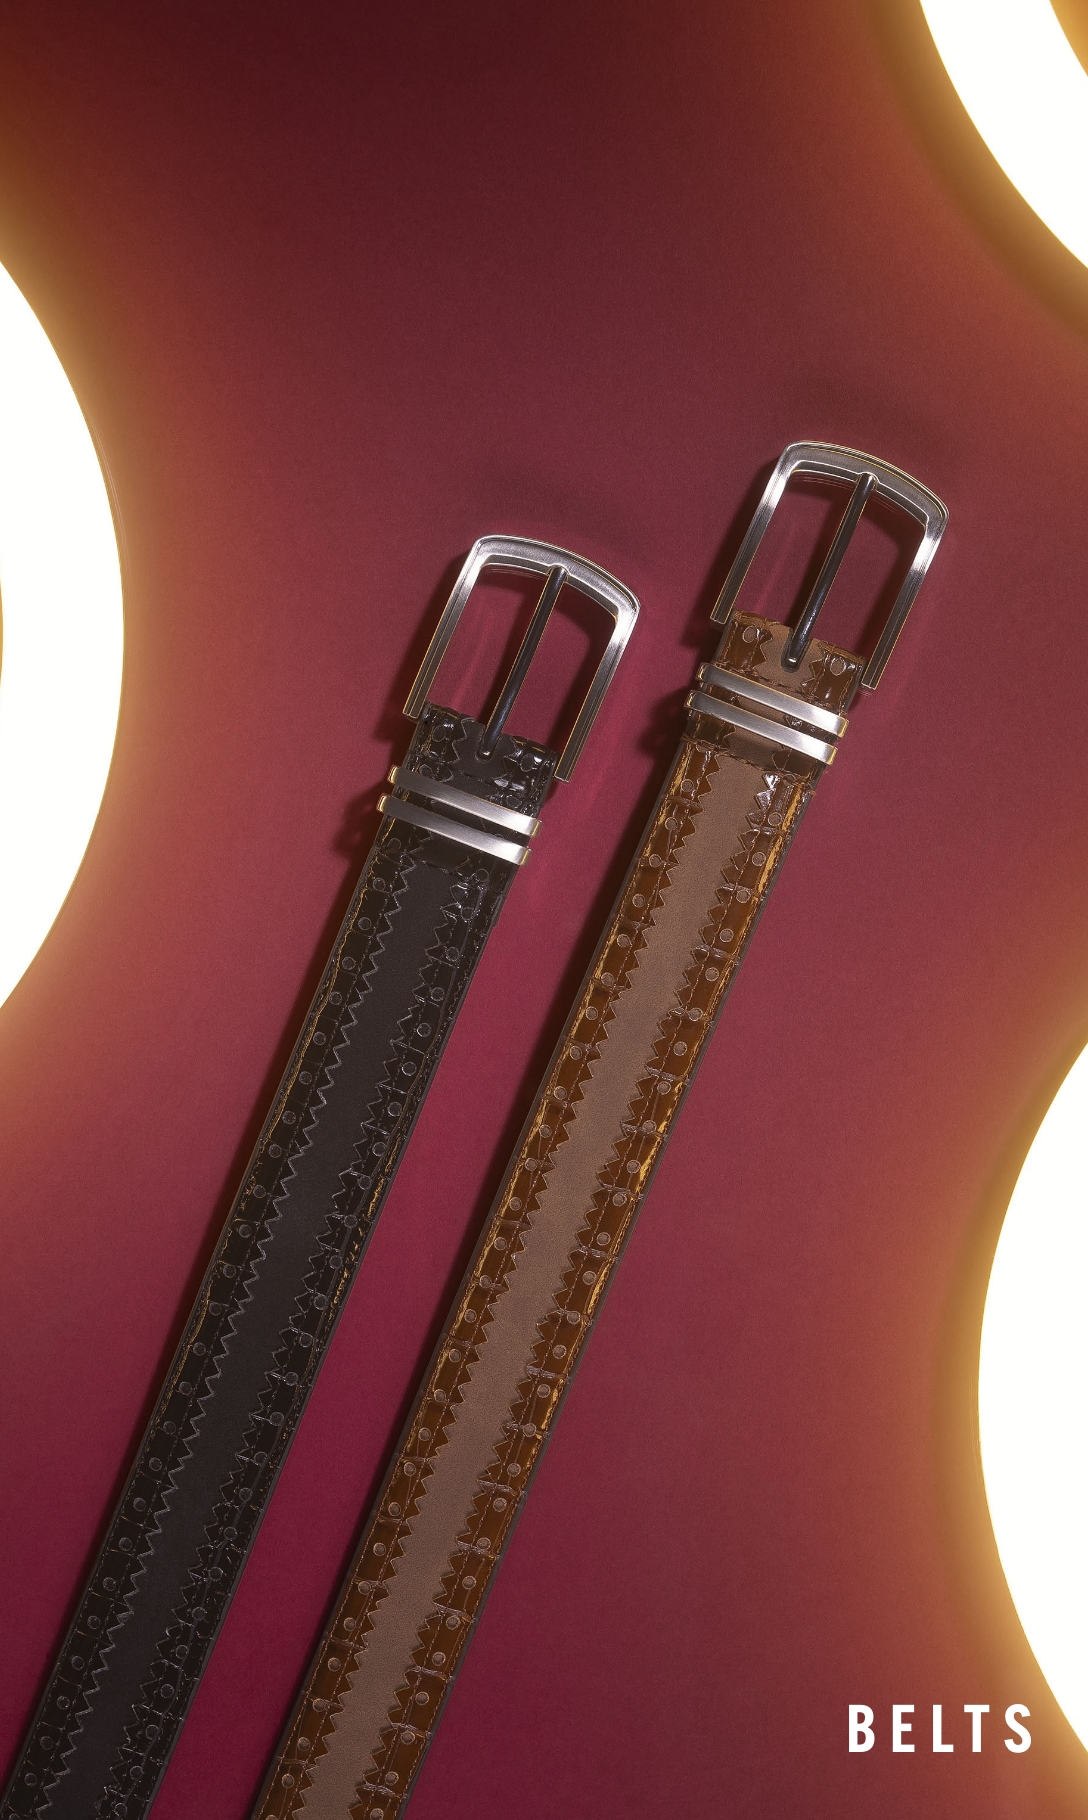 Men's Belts category. Image features the Gustavo belt. 